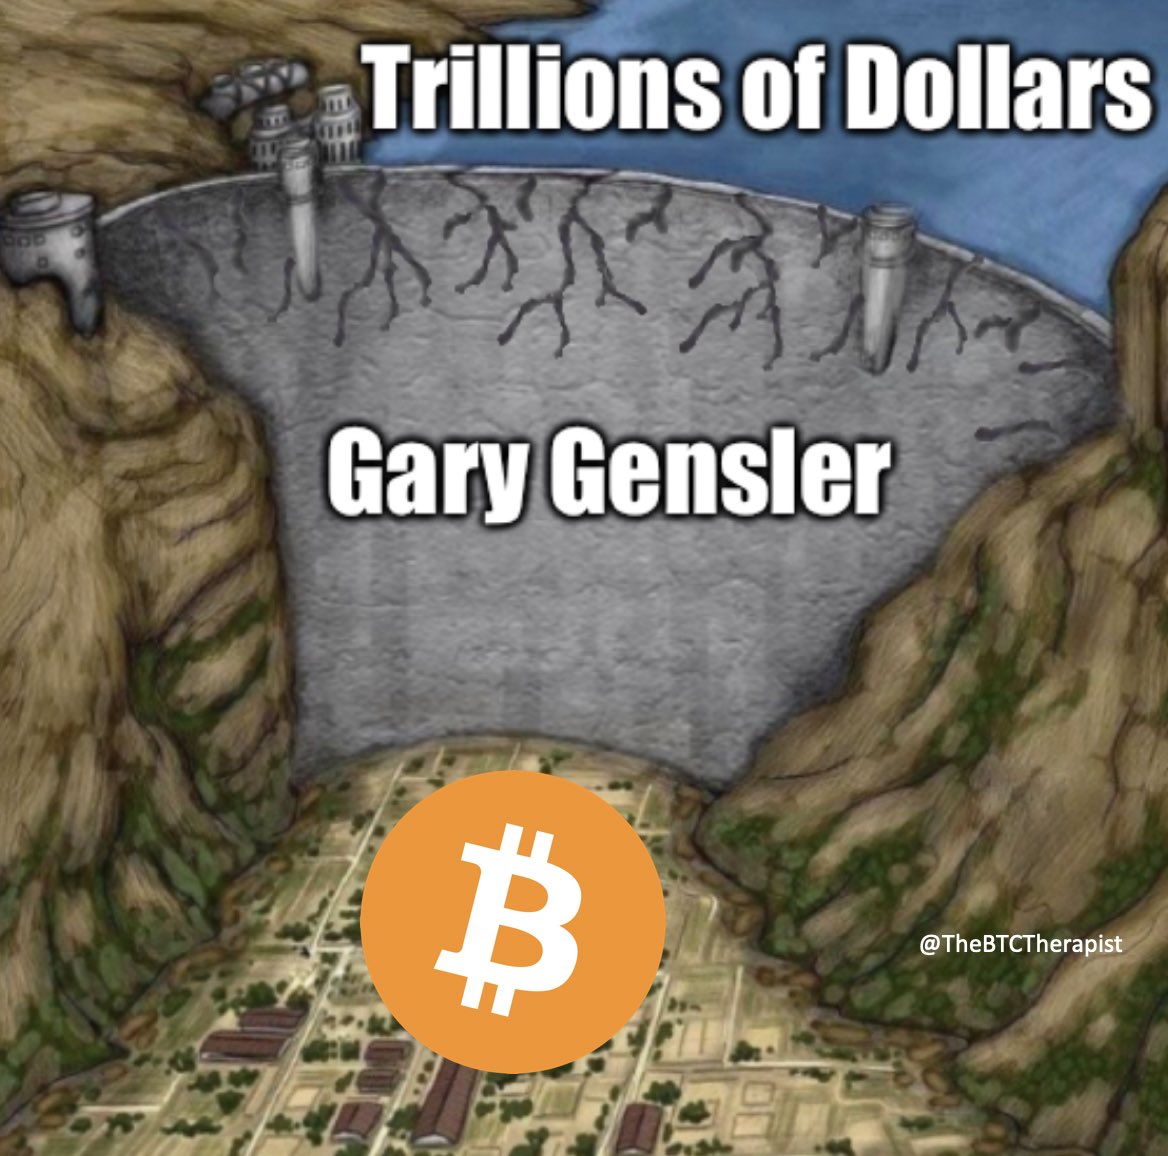 The flood is coming. #BTC